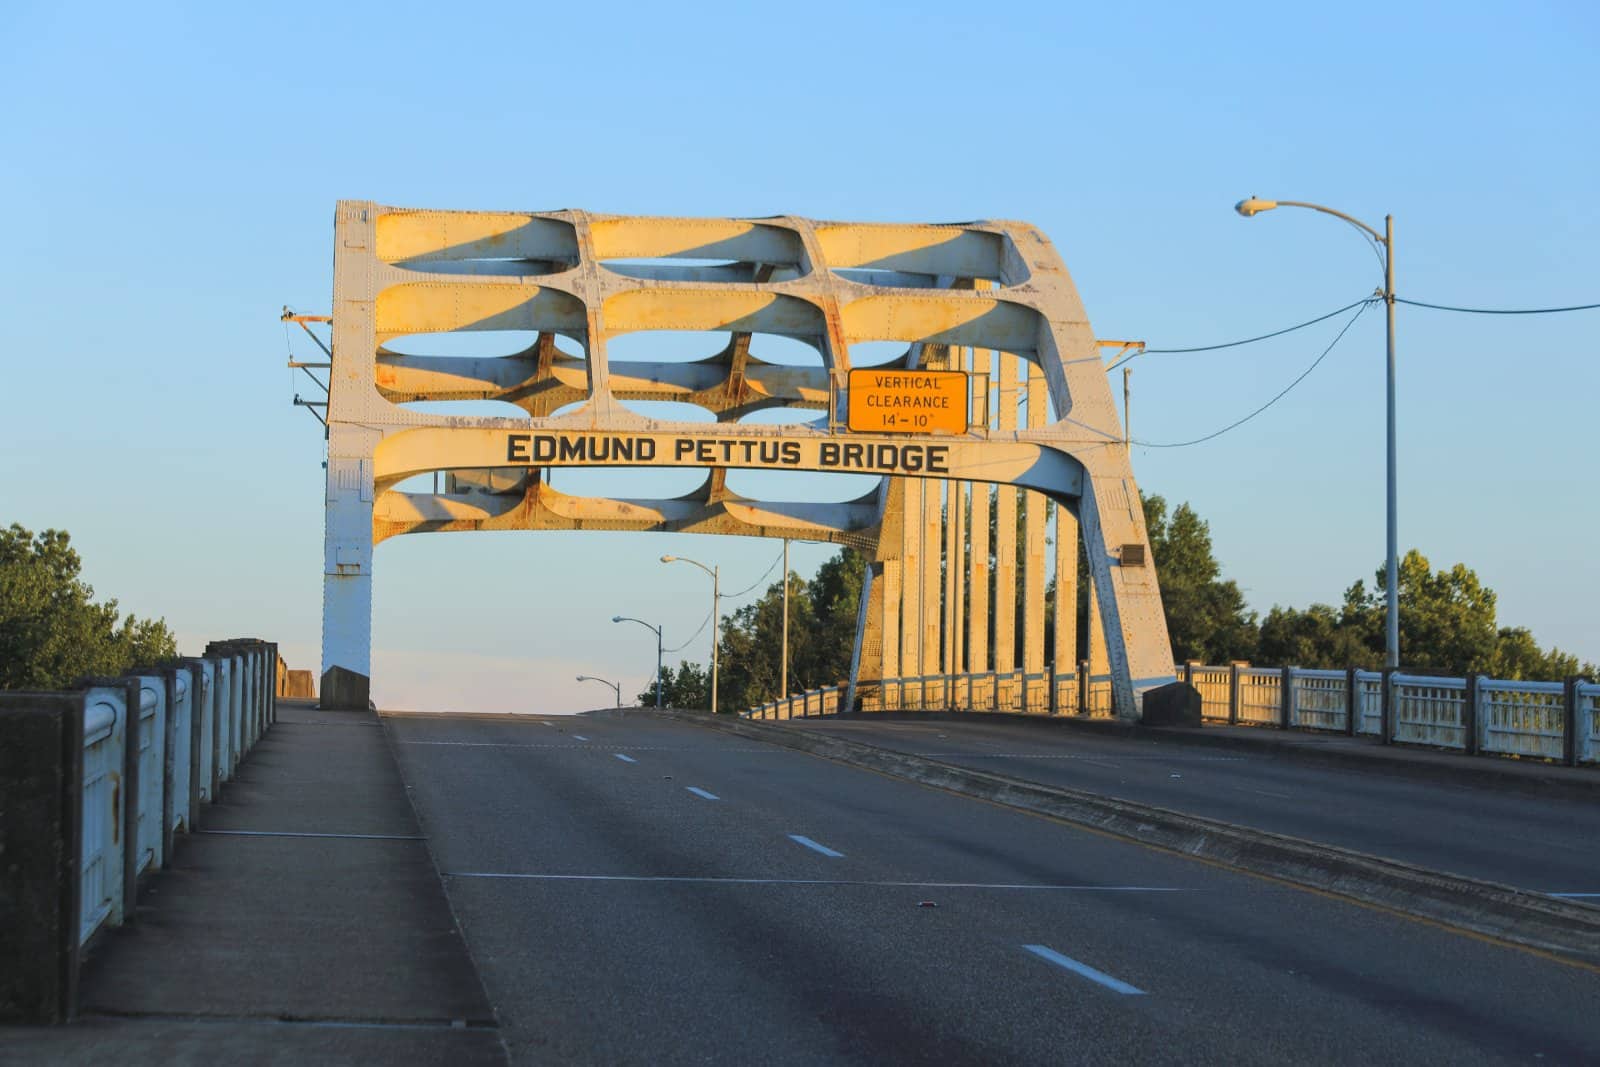 <p class="wp-caption-text">Image Credit: Shutterstock / Jean Prado R75</p>  <p><span>Walk the Edmund Pettus Bridge in Selma, where a pivotal moment in the Civil Rights Movement occurred during the Selma to Montgomery marches. It’s a place that changed history.</span></p>